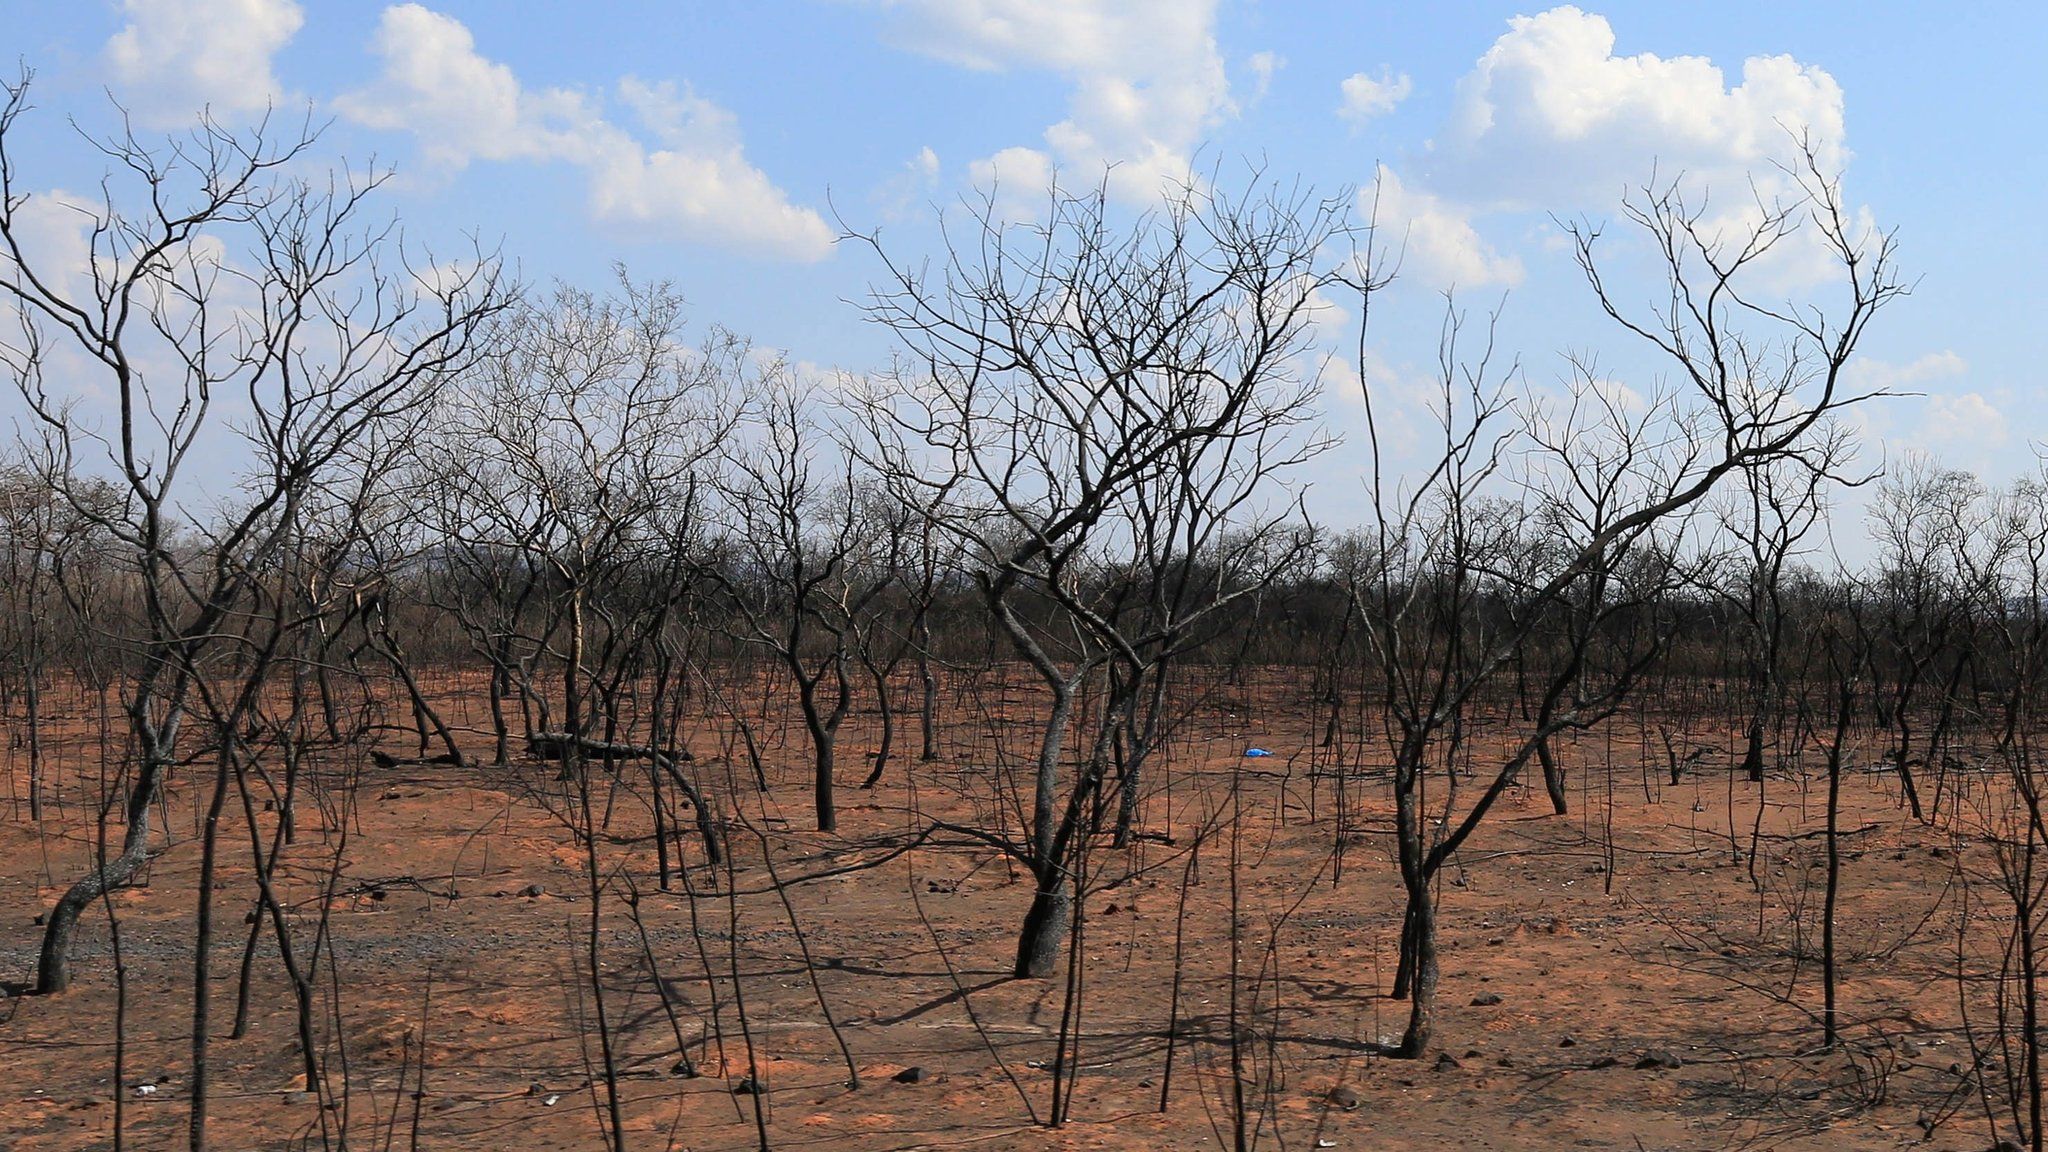 View of a burned forest in San Jose de Chiquitos, in Bolivia, 28 August 2019